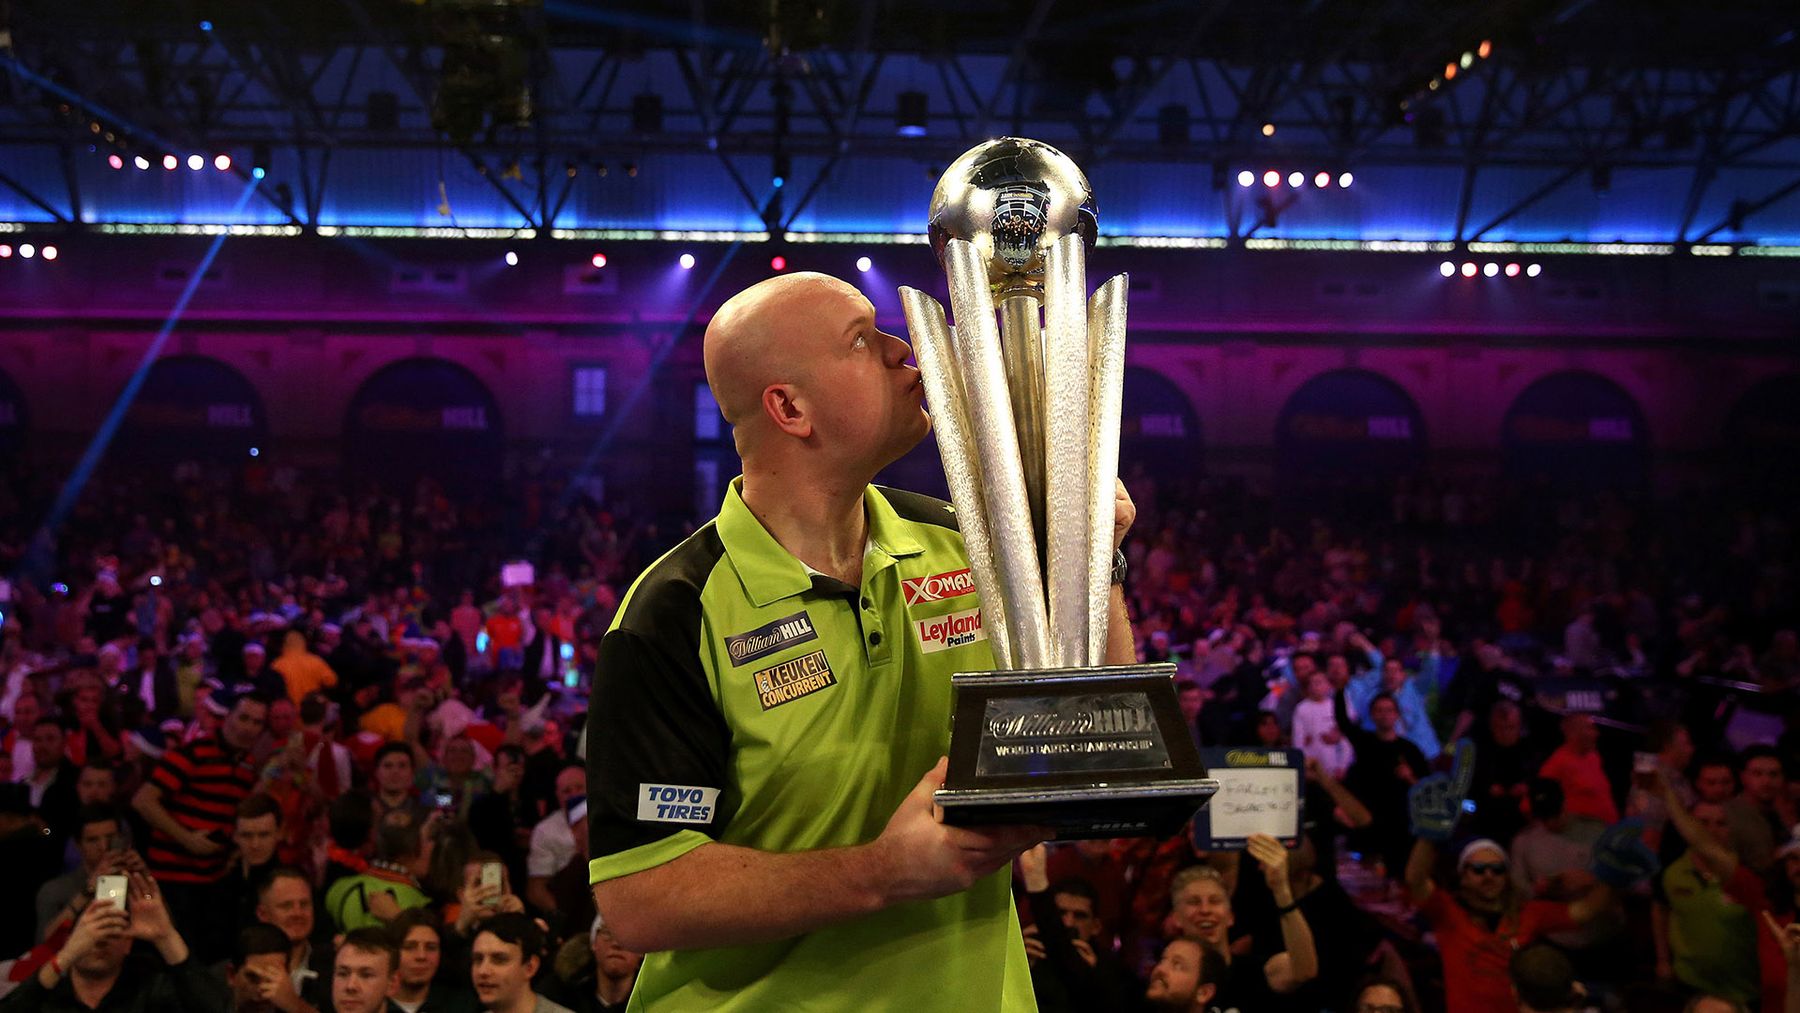 PDC World Darts Championship result: Michael van Gerwen defeats Michael Smith 7-3 to lift trophy for the third time